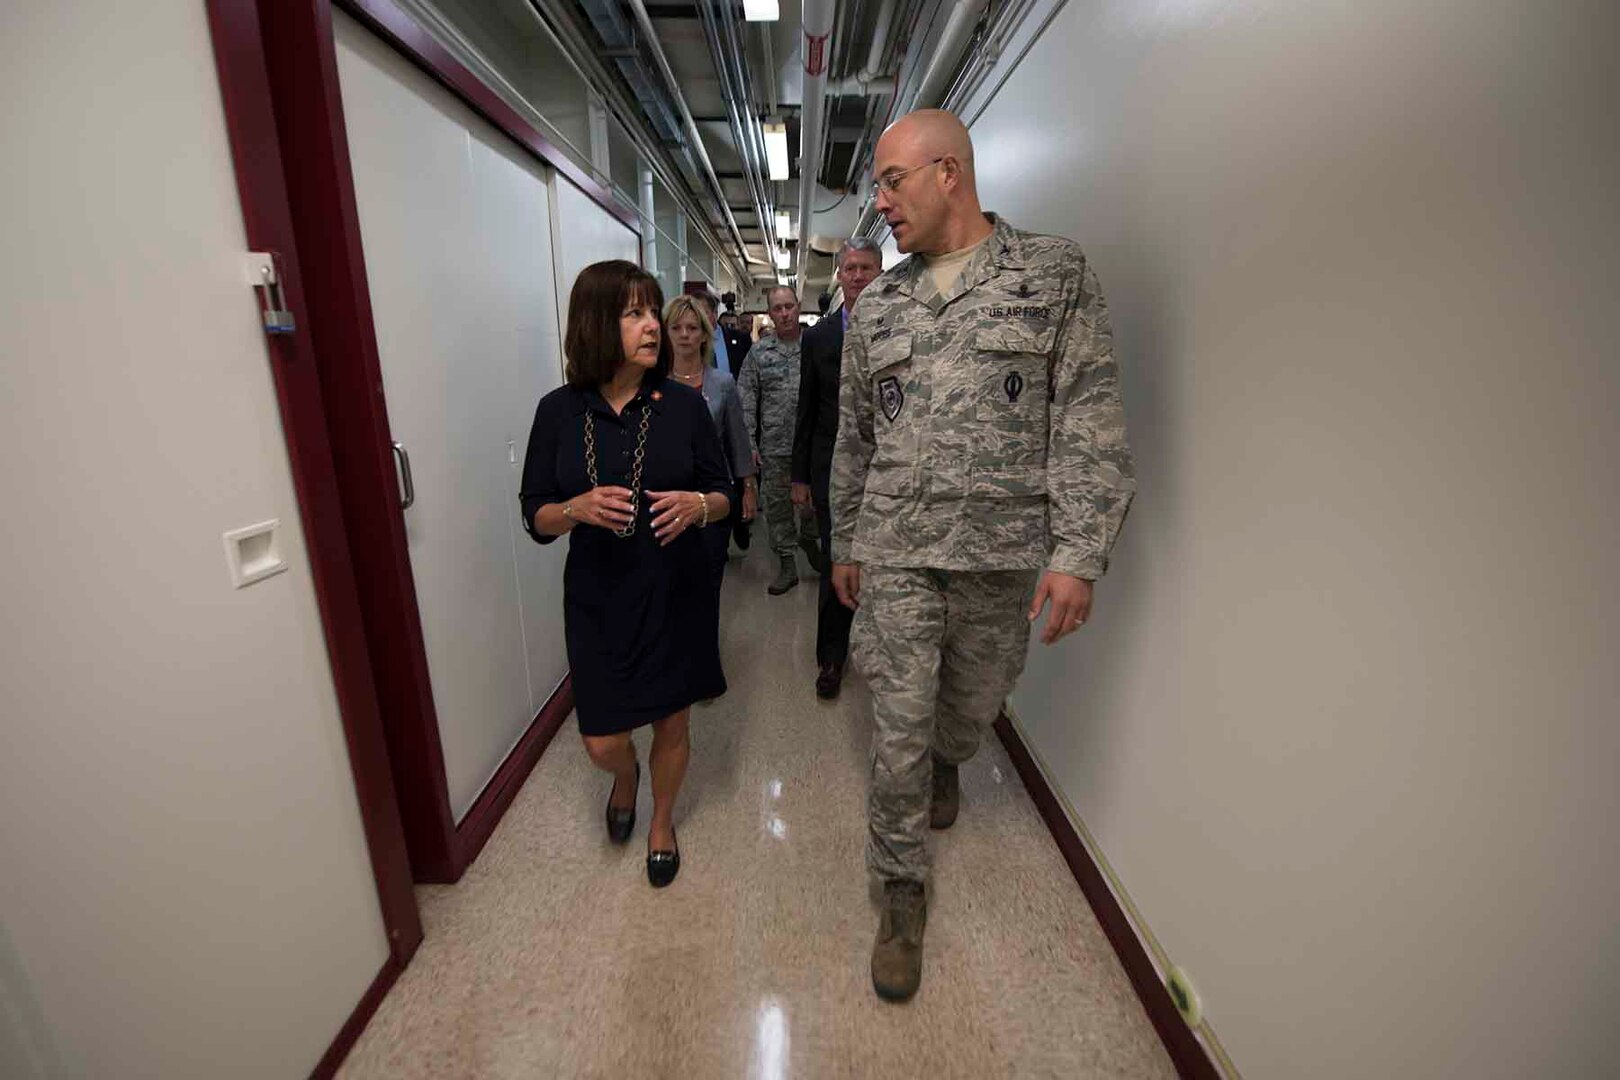 CHEYENNE MOUNTAIN AIR FORCE STATION, Colo. - Karen Pence, second lady of the United States, tours Cheyenne Mountain Air Force Station, Colo., June 23,
2017.  Pence visited various areas of the complex including the indoor gym, medical facility and the mechanical room. (U.S. Air Force photo by Senior Airman Dennis Hoffman)
